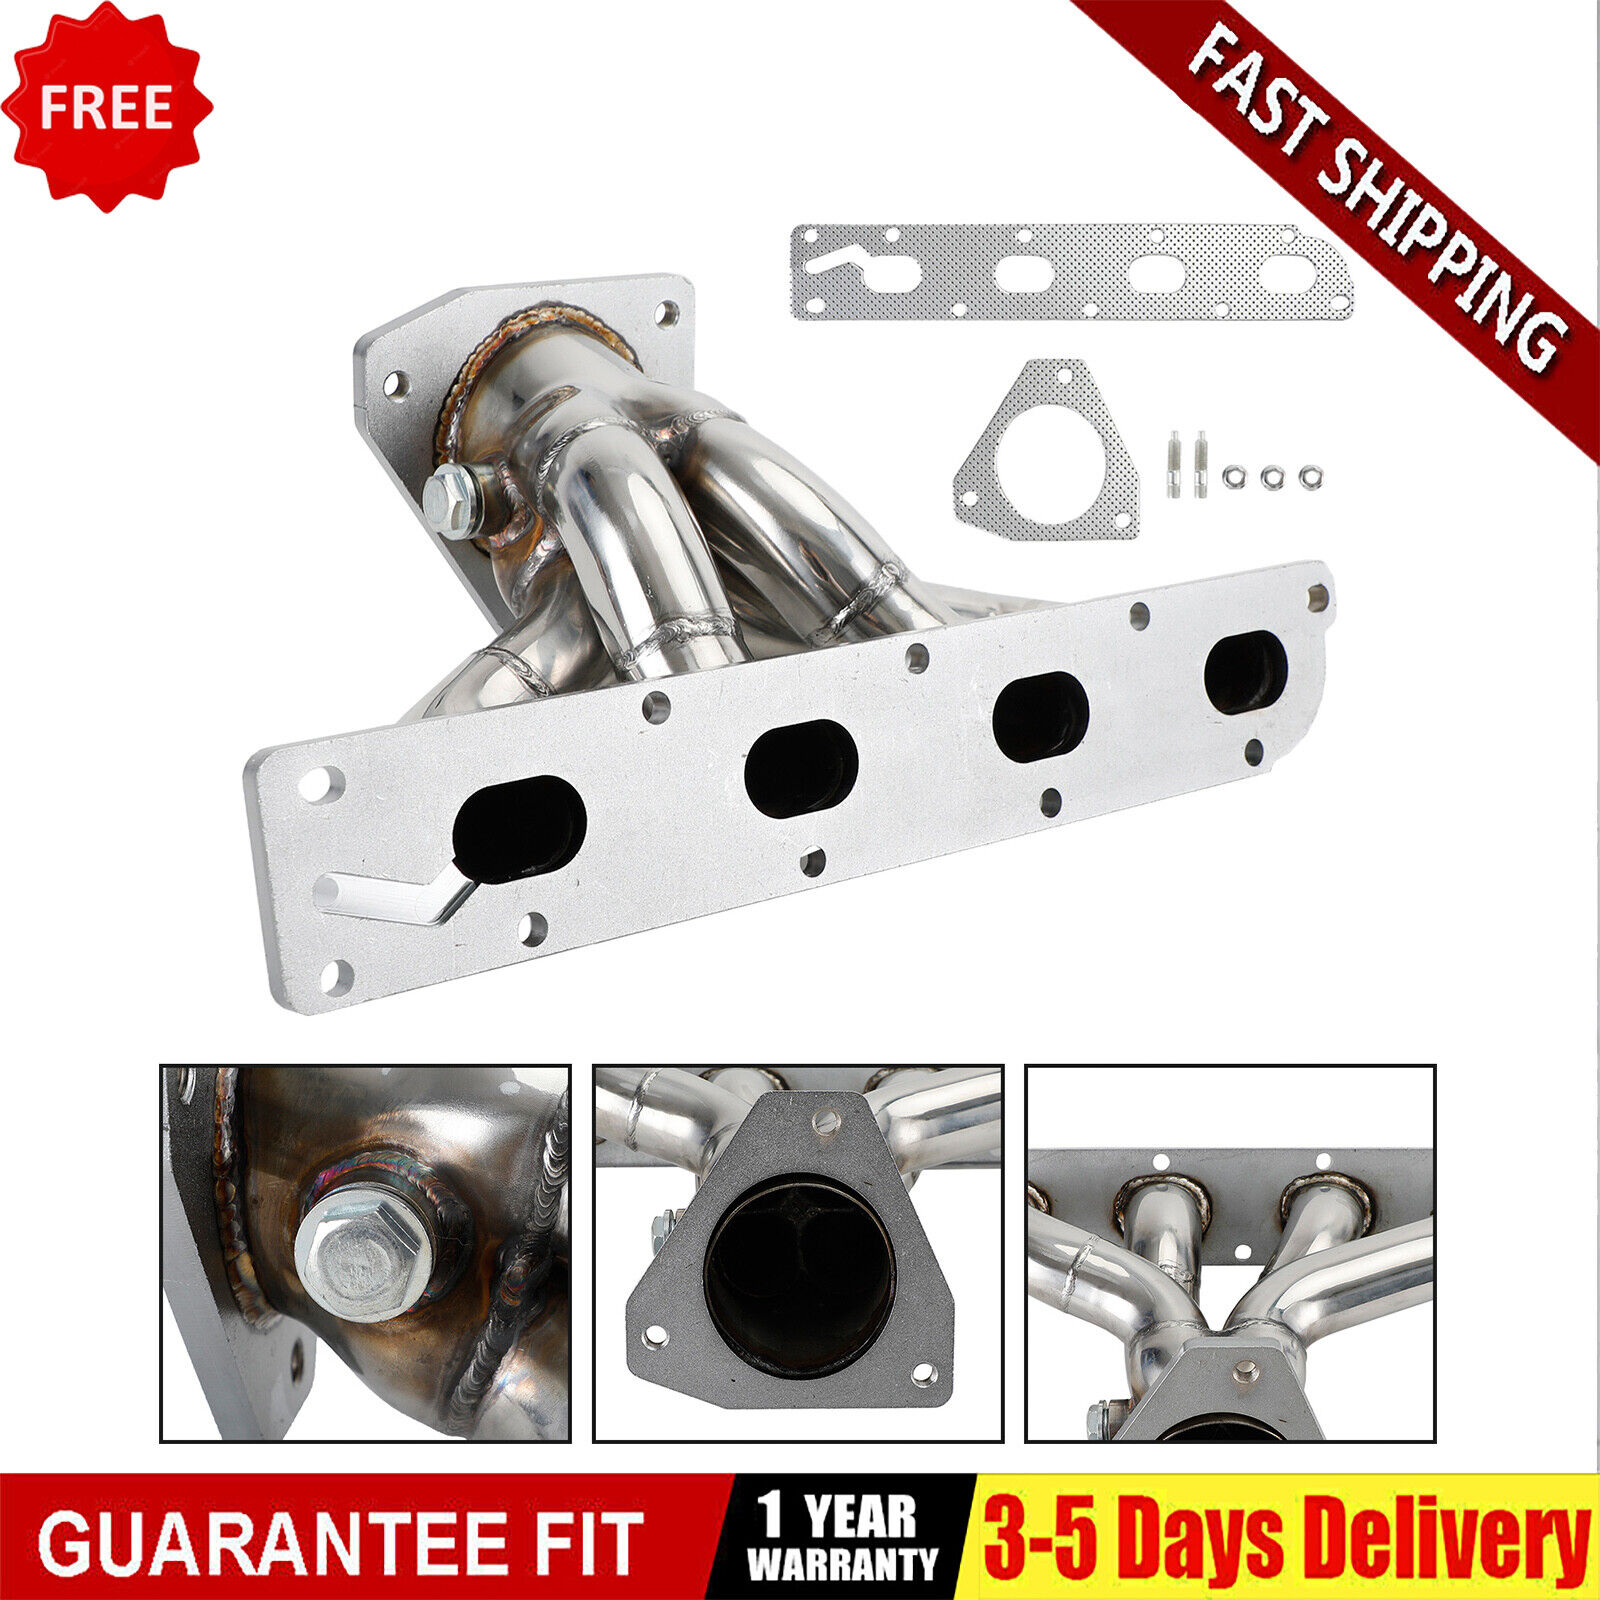 Exhaust Stainless Header Kit For Chevy Cobalt & HHR For Saturn Ion-1 & Ion-2 NEW